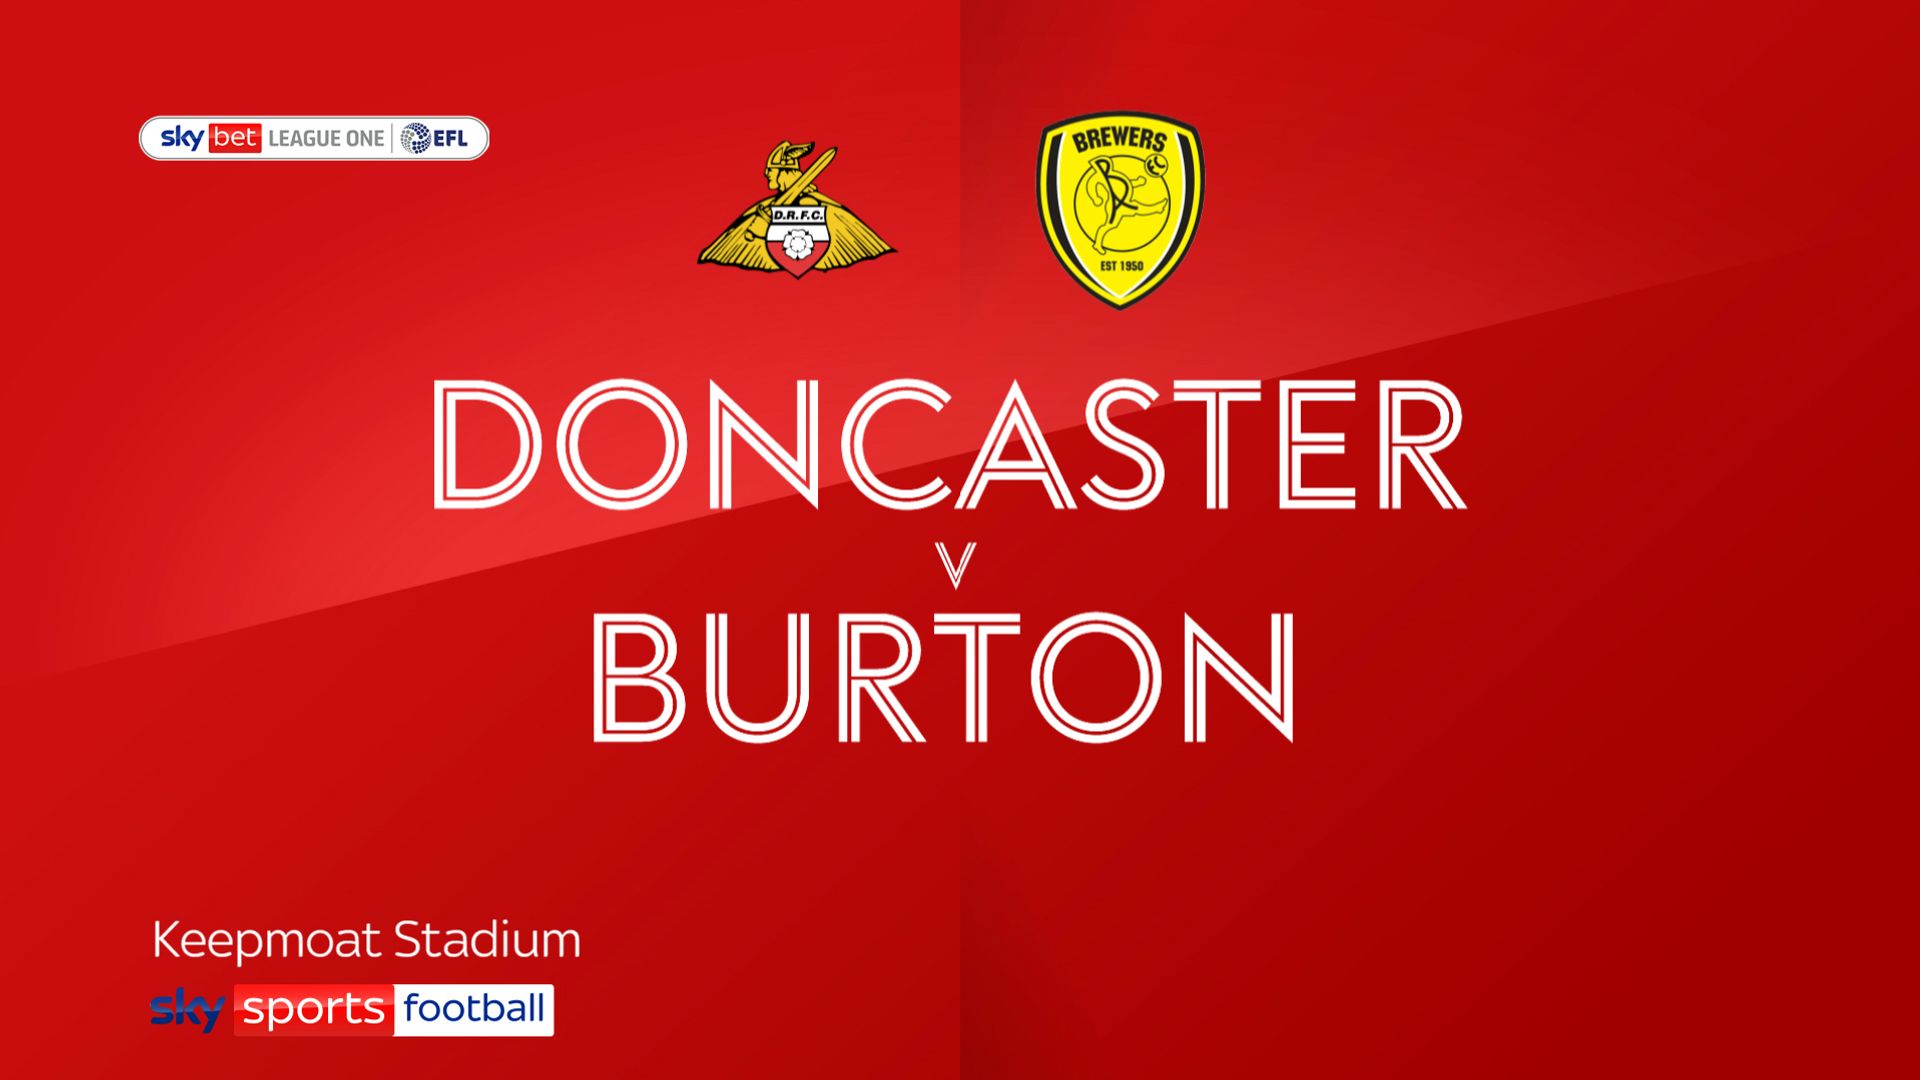 Doncaster cling on to League One status by beating Burton